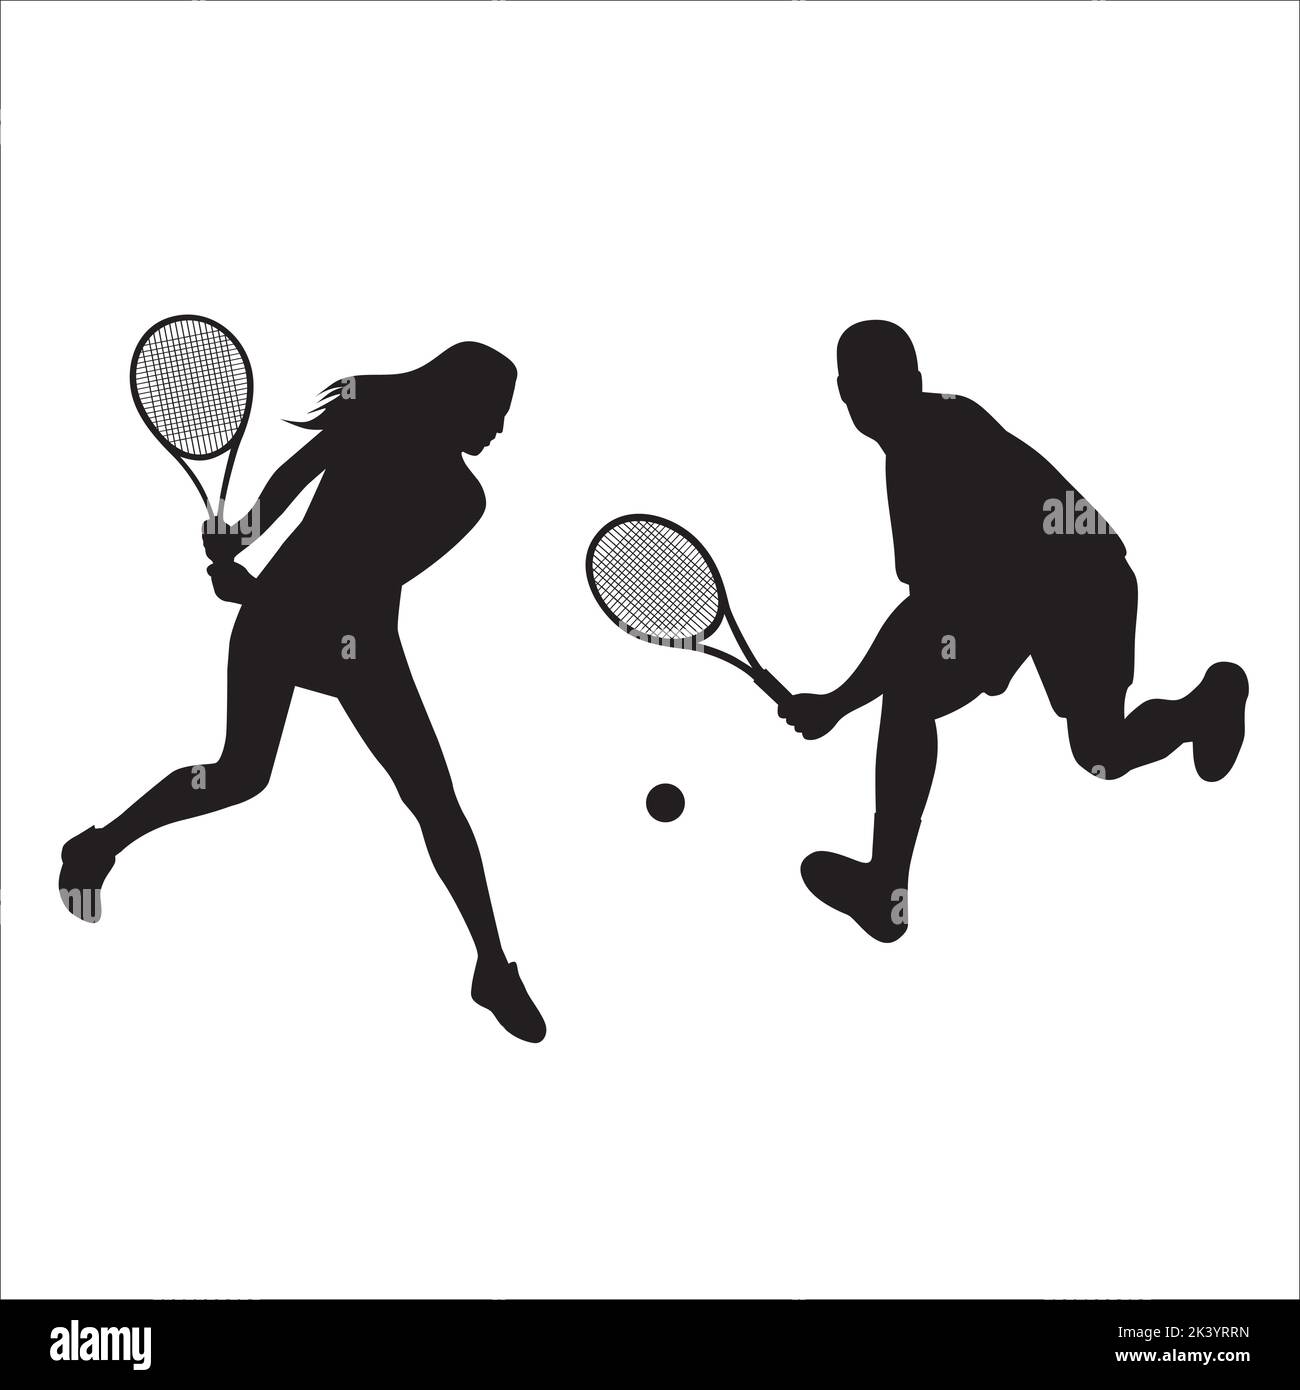 Vector Set Of Tennis Players Silhouettes Illustration Isolated On White Background Stock Vector